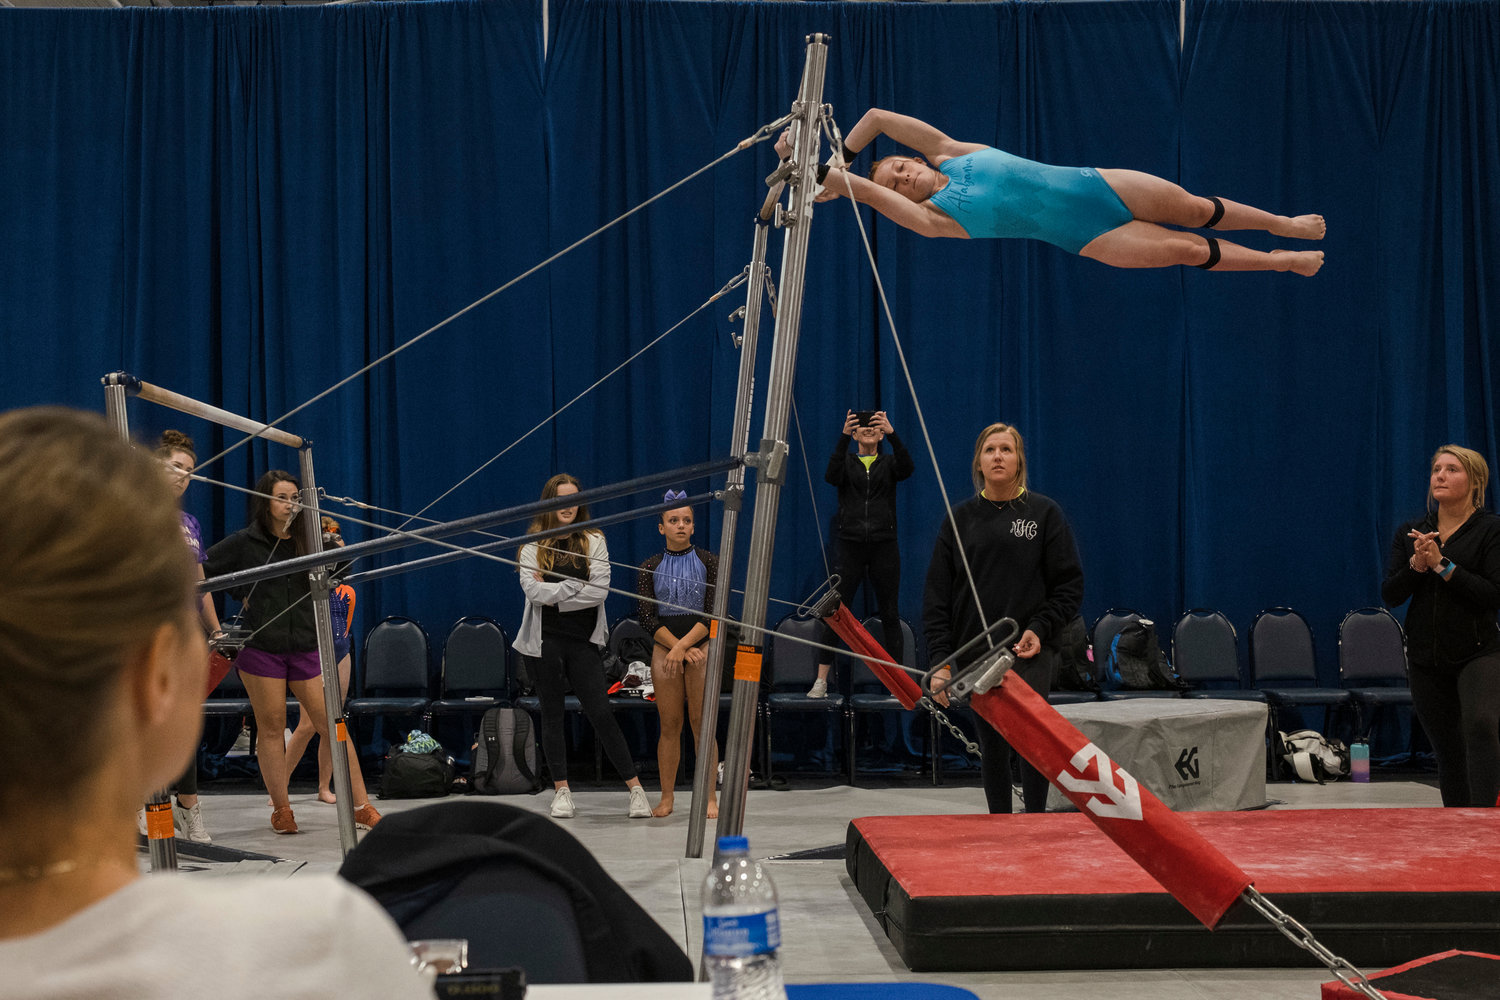 Eastern Shore Gymnastics Academy gymnast Luci LeCroy performs the final skill of her uneven bars routine at the USA Gymnastics Region 8 Xcel Championship in Foley May 6.